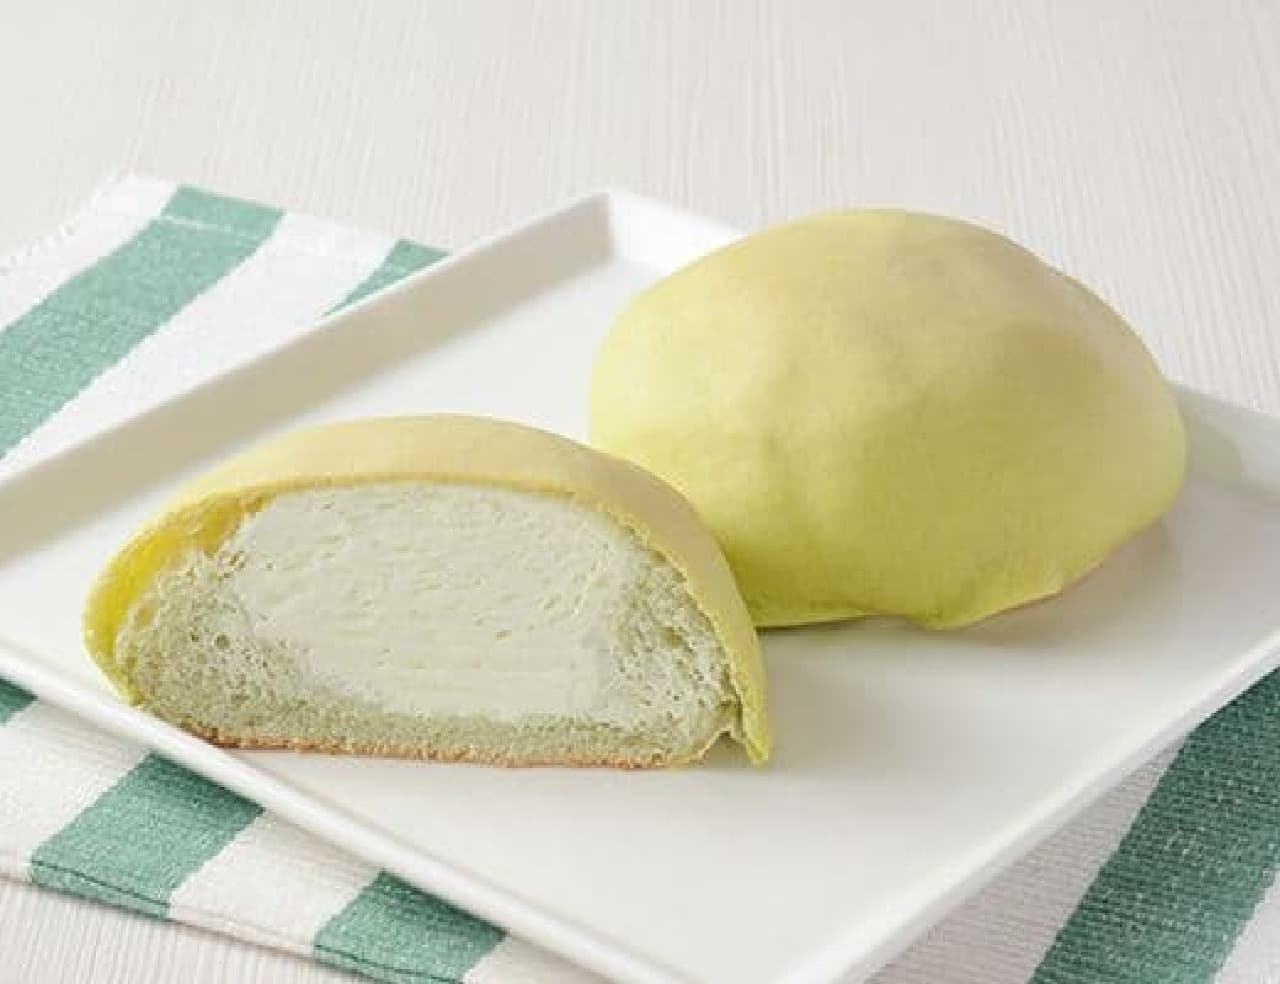 LAWSON "Squished! Moist Melon Pan Melon Whipped Cream".